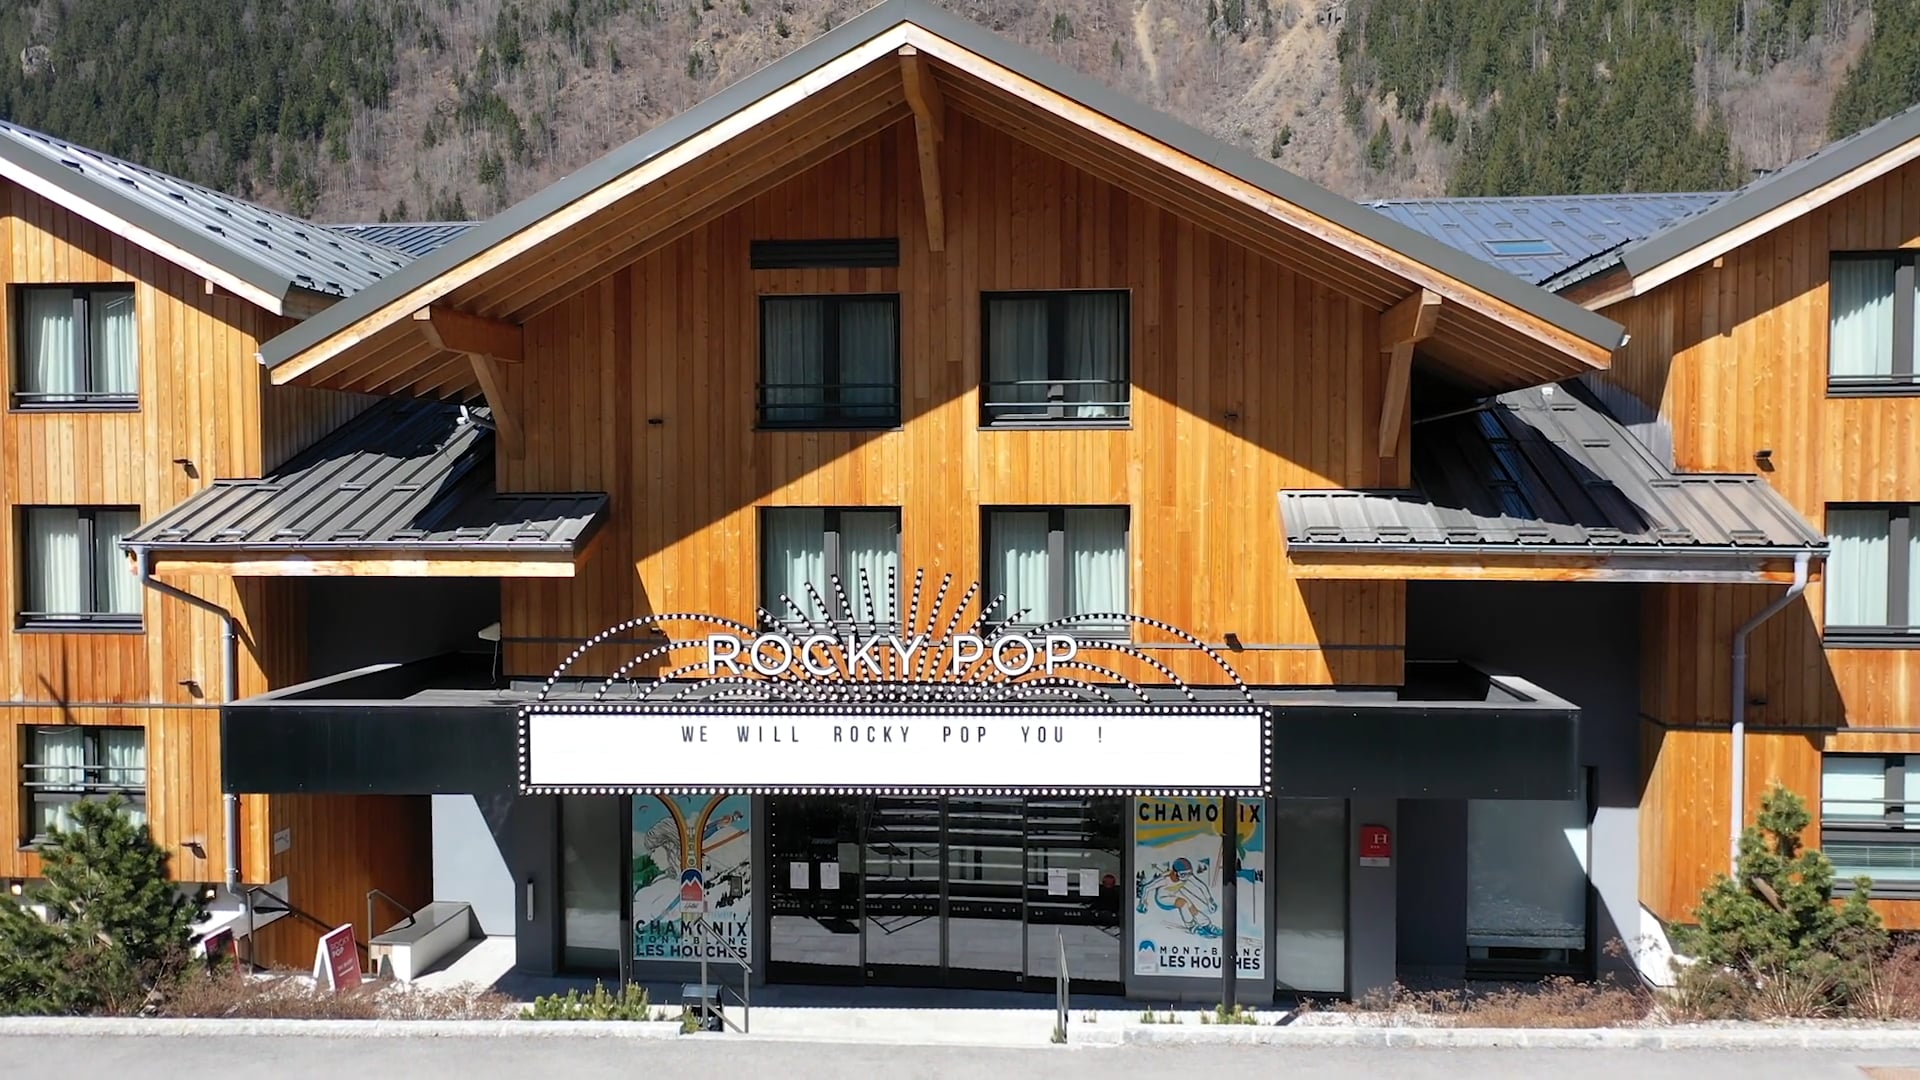 HOTEL ROCKYPOP Les Houches - Homepage